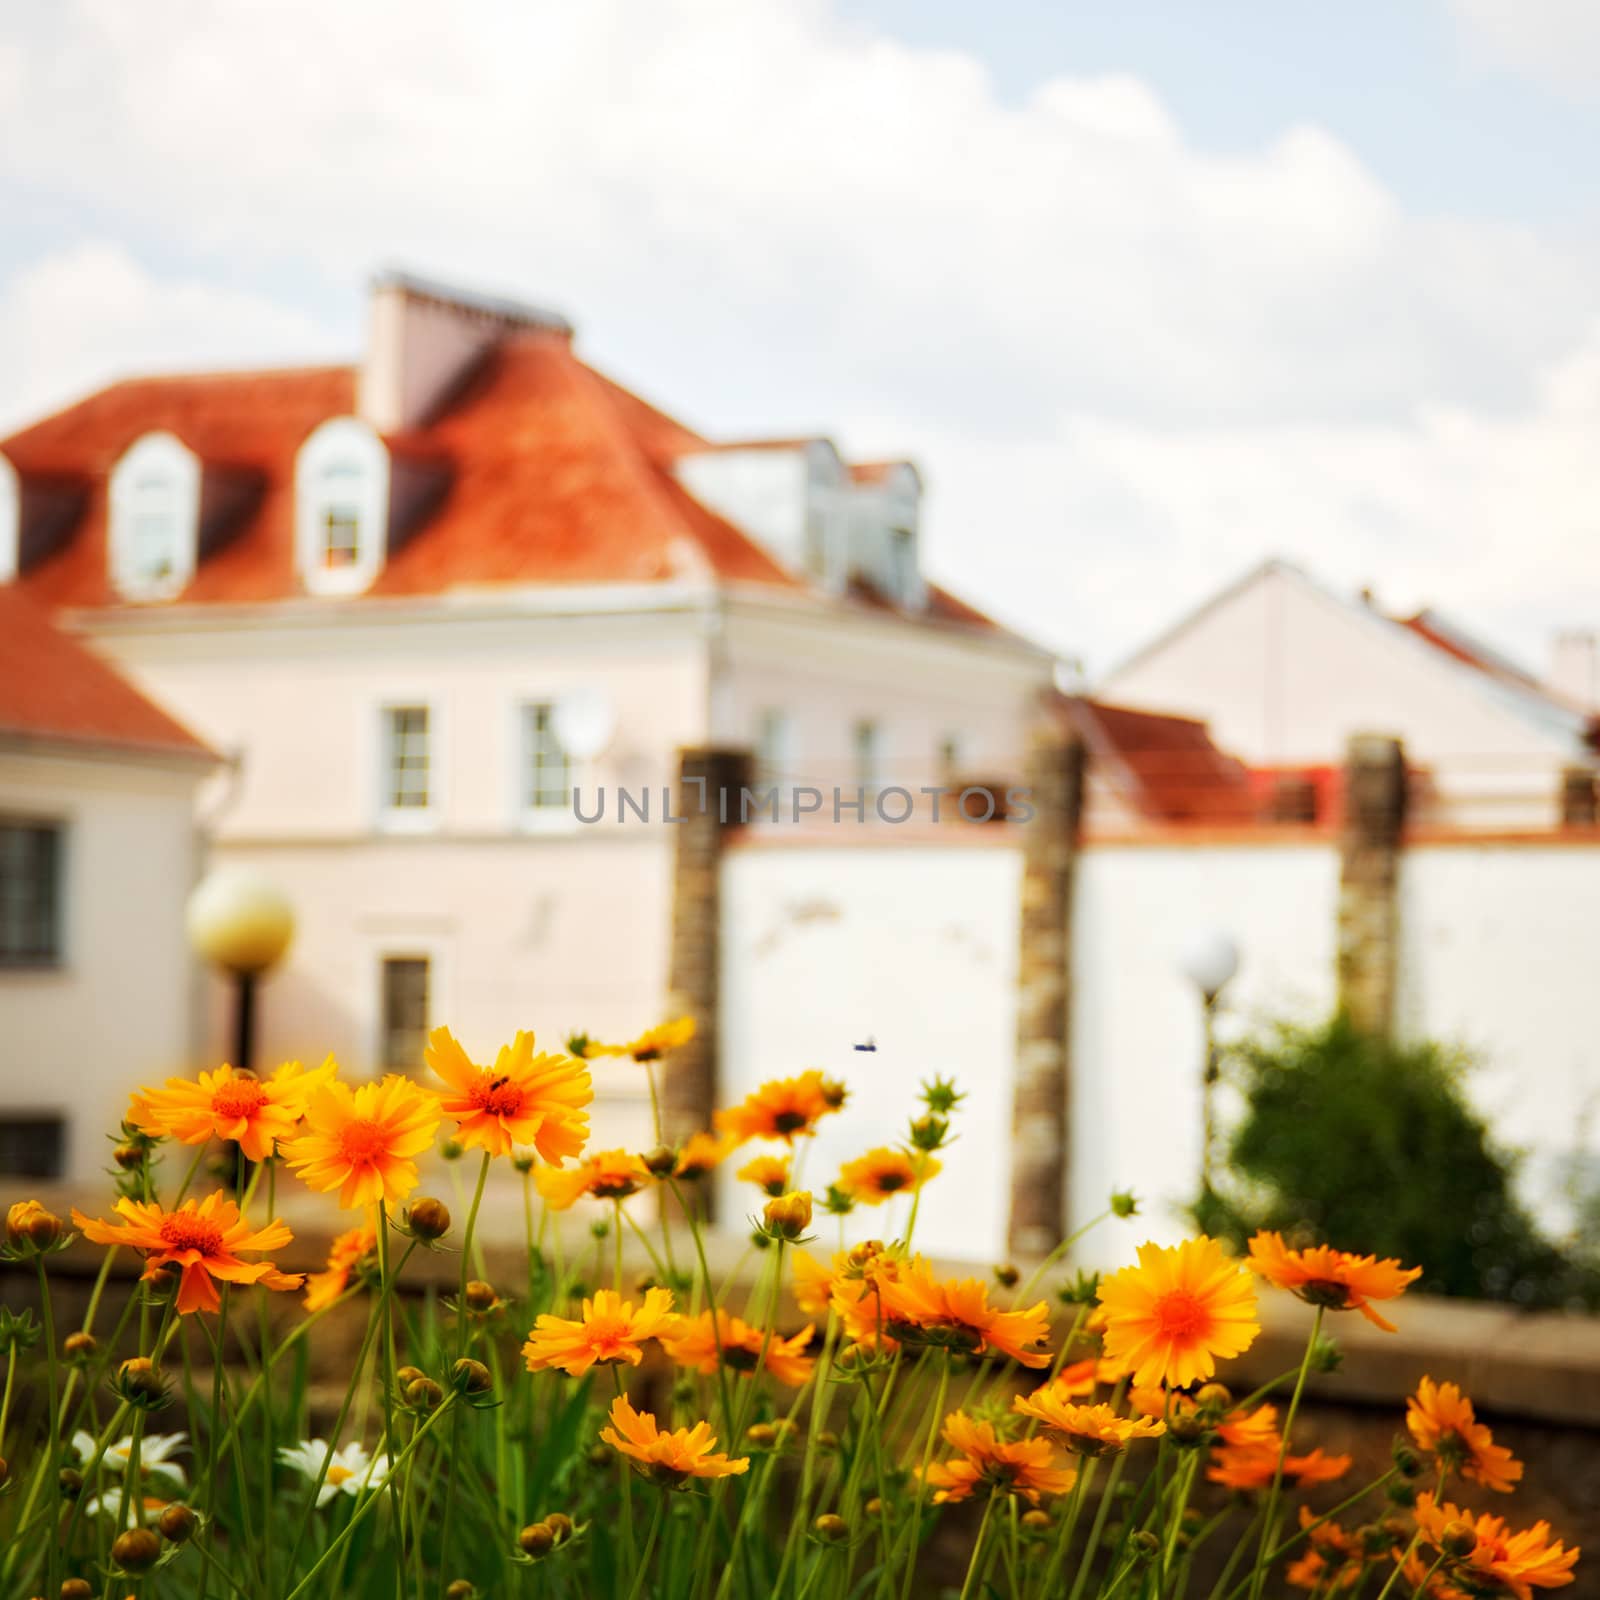 daisies in front of house by petr_malyshev